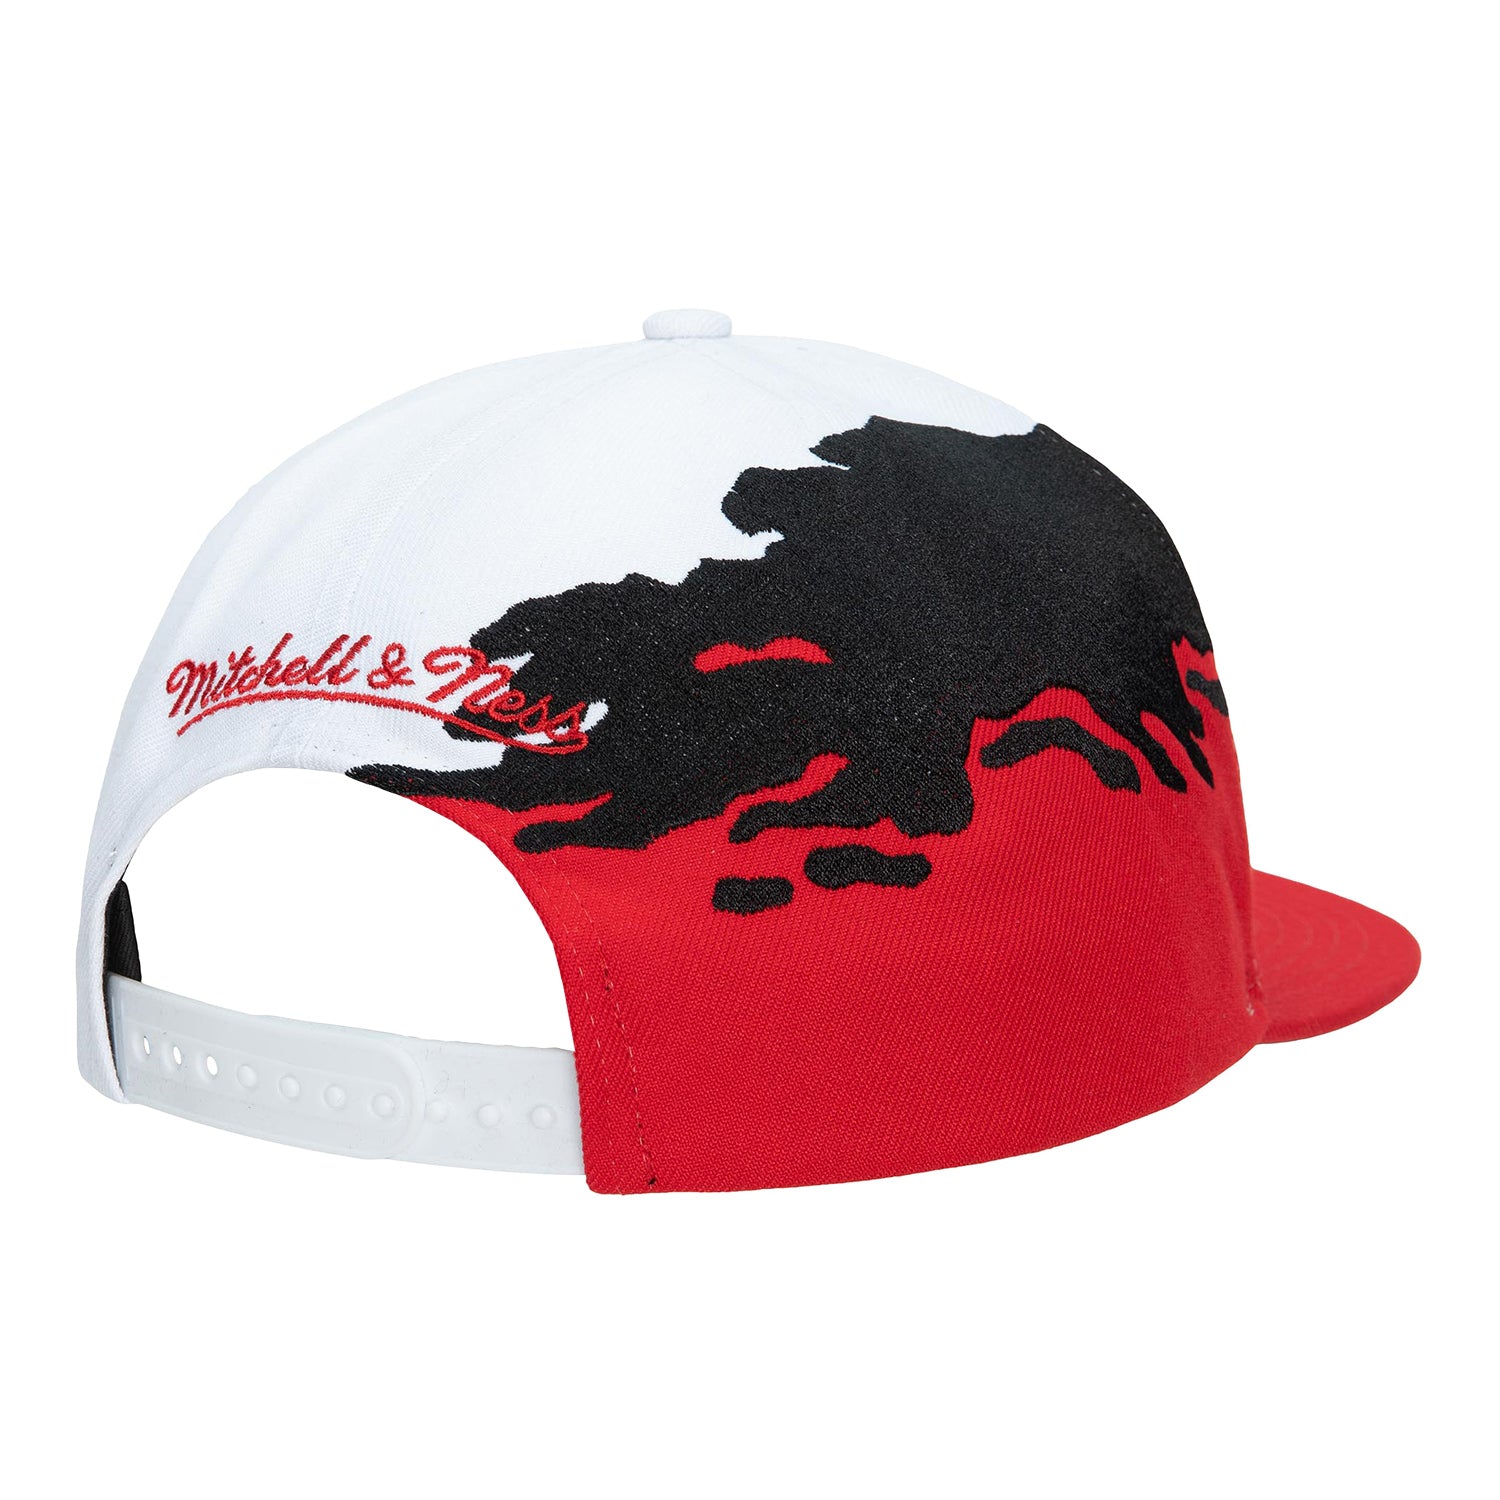 1991 Chicago Bulls Hat, Vintage clothing/material